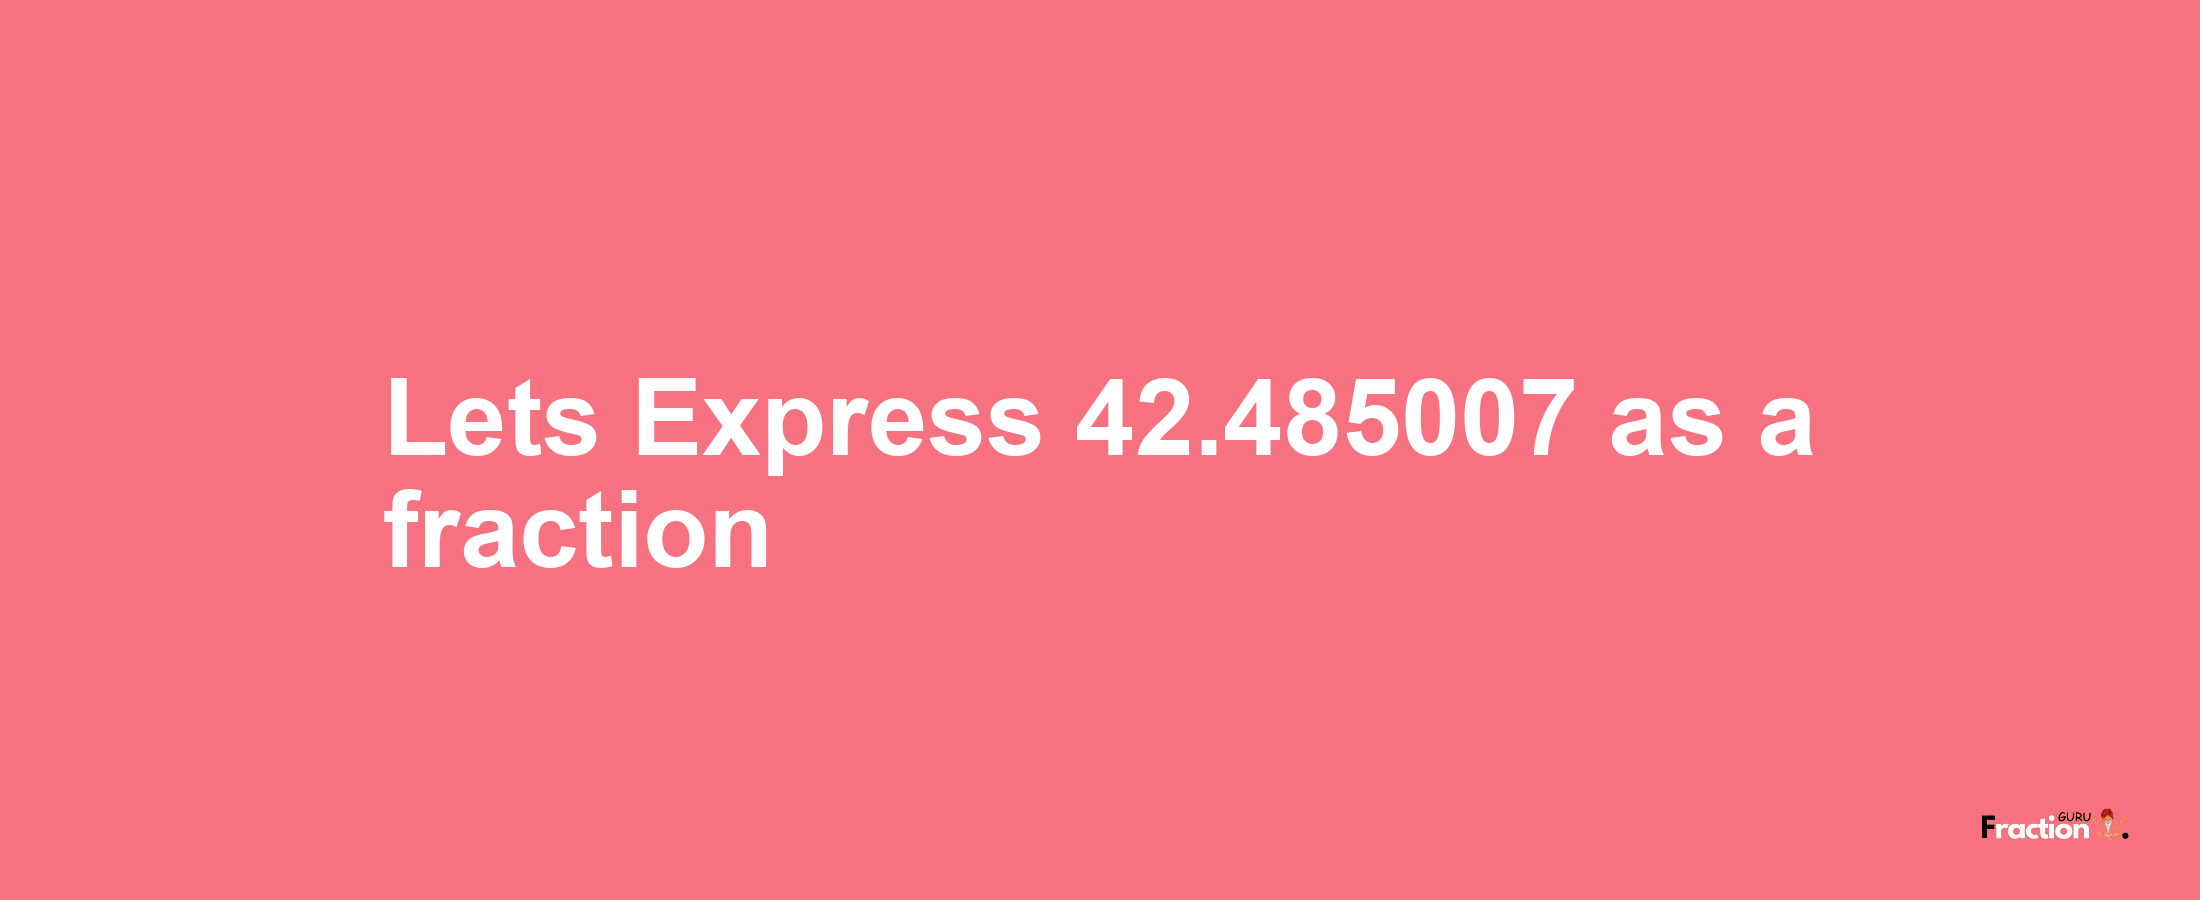 Lets Express 42.485007 as afraction